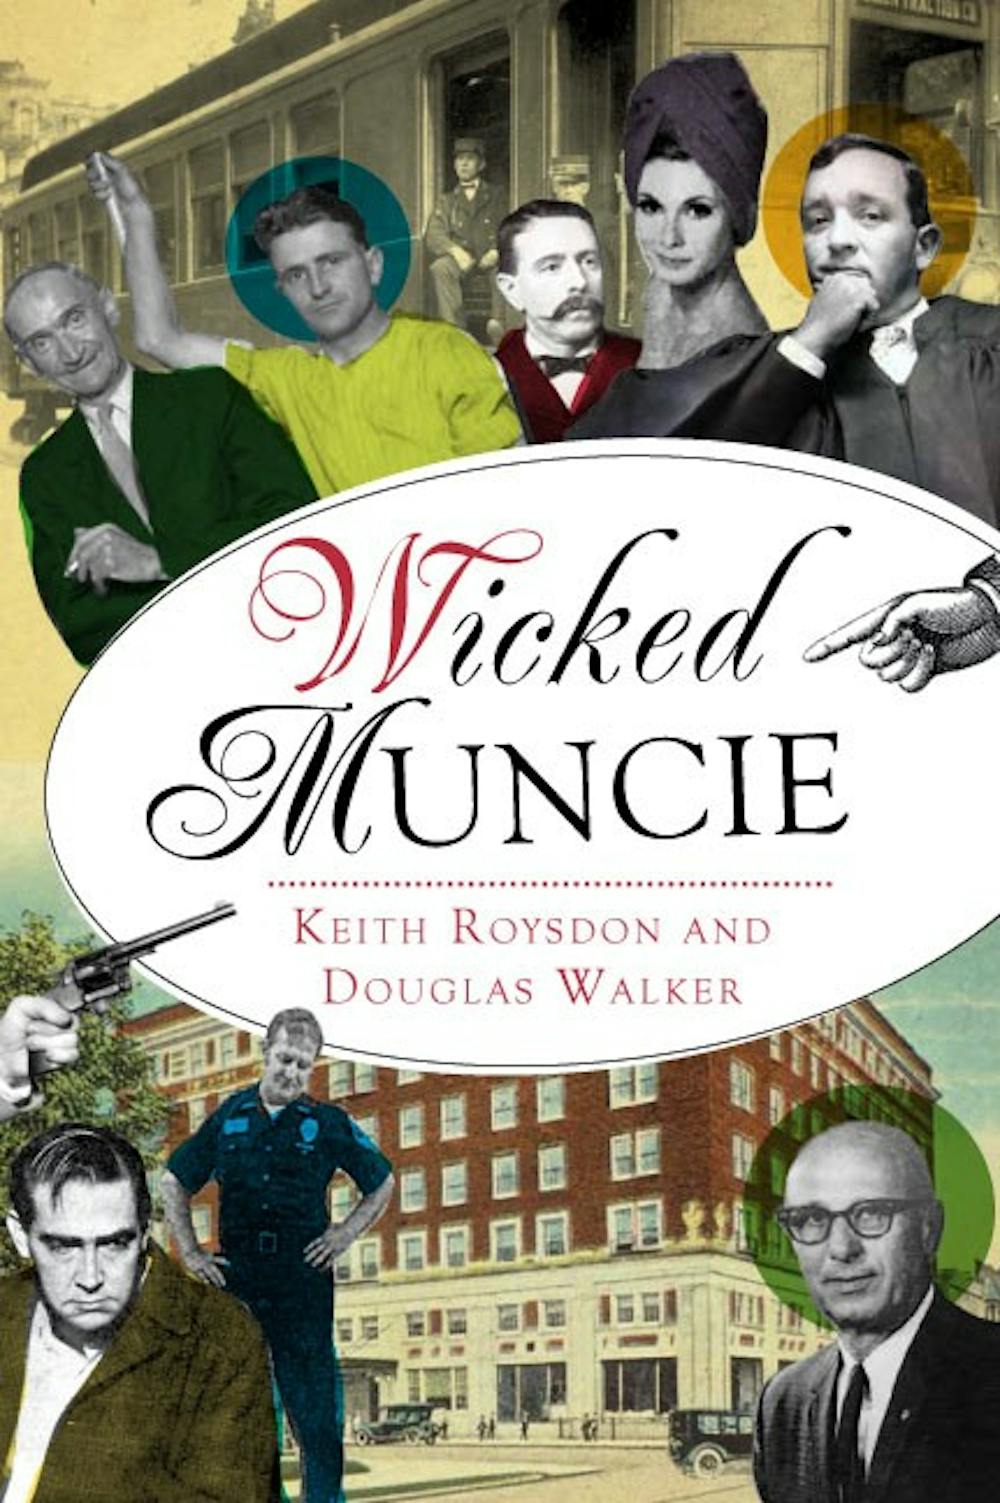 Local 'Wicked Muncie' authors to host book signing